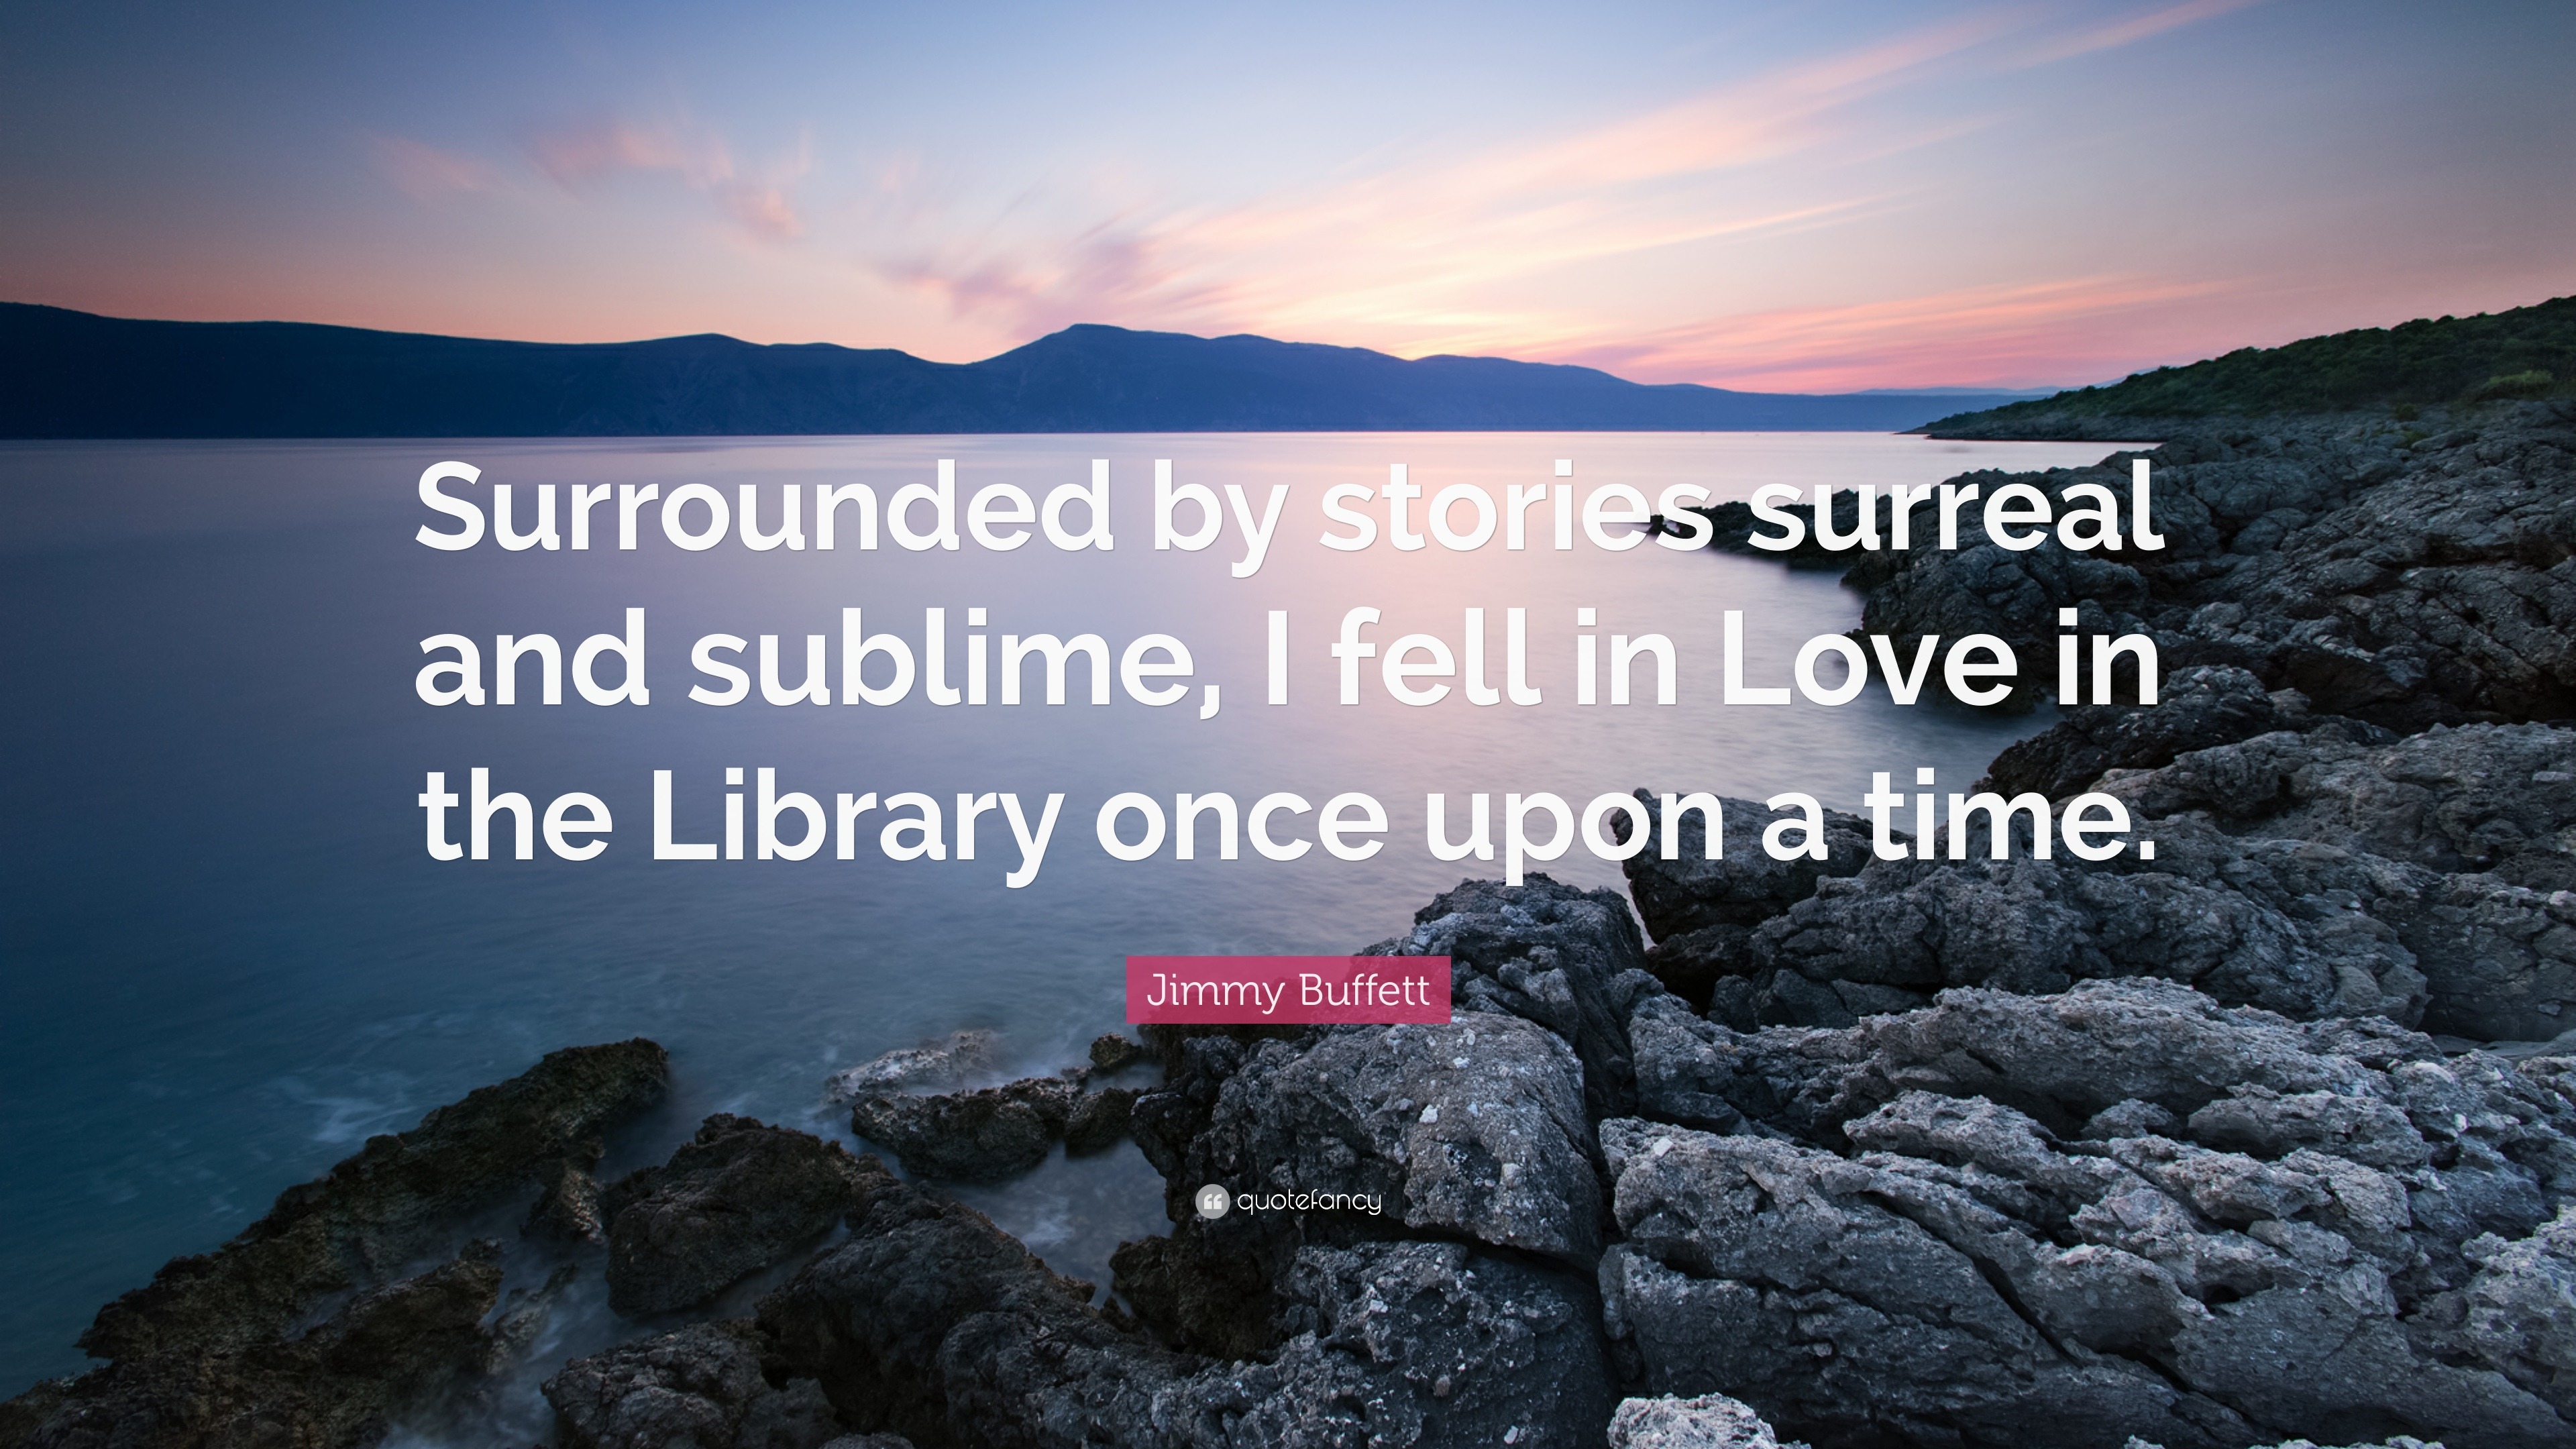 Jimmy Buffett Quote: “Surrounded by stories surreal and sublime, I